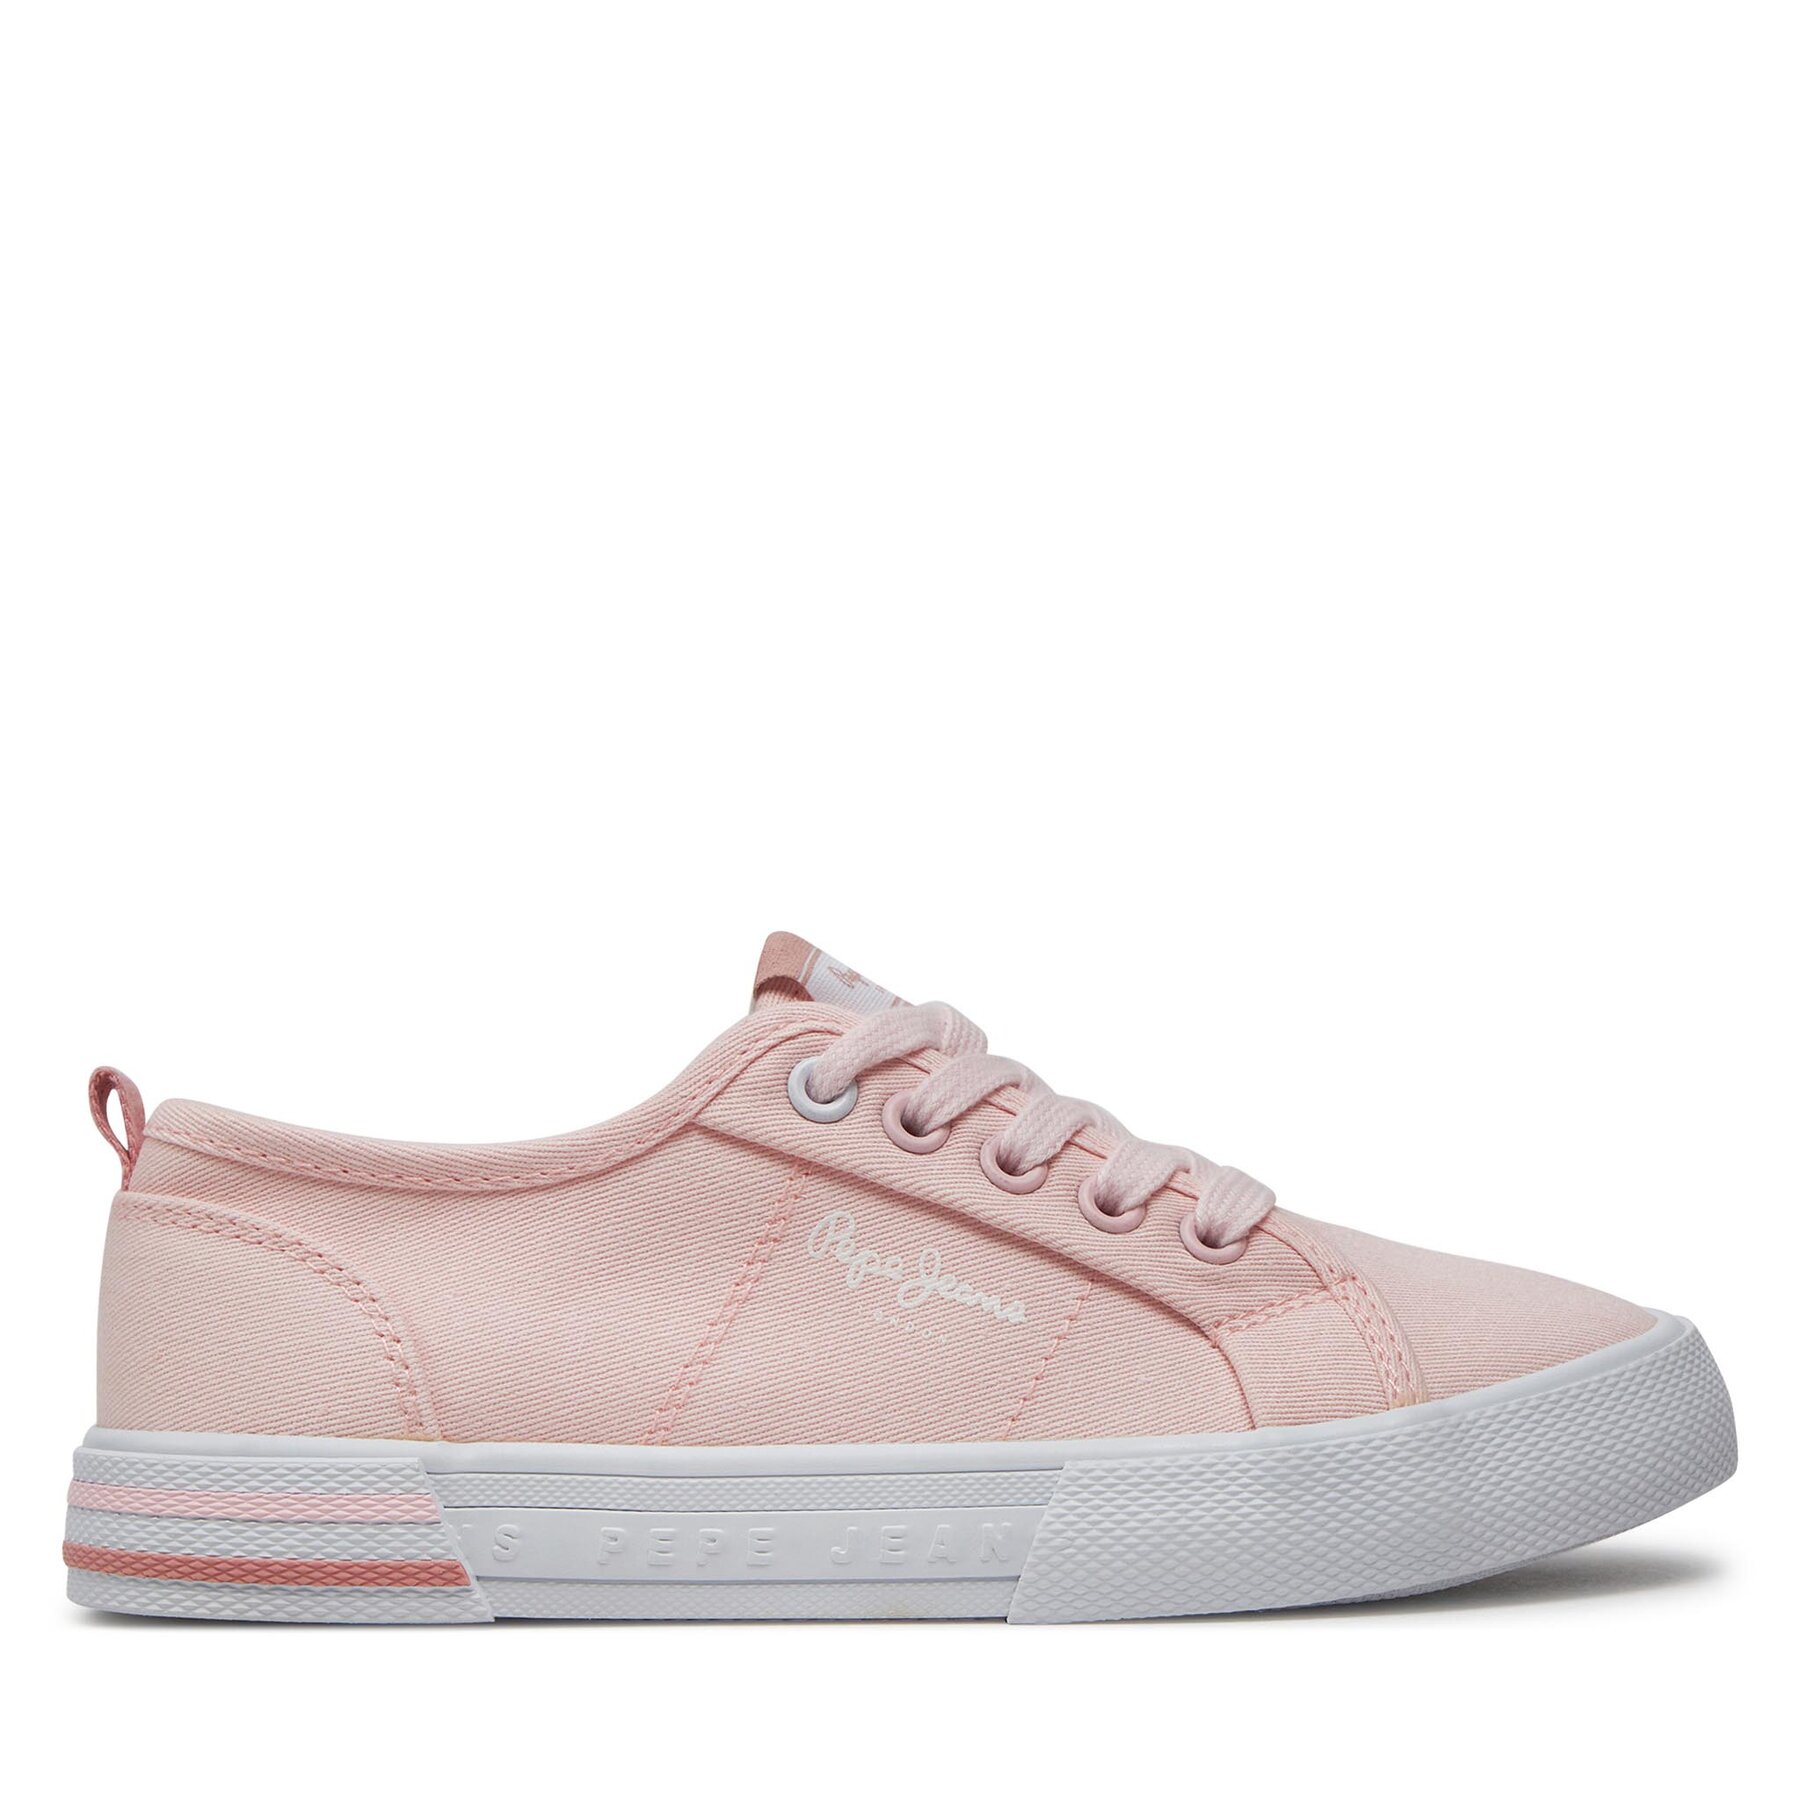 Sneakers aus Stoff Pepe Jeans Brady Basic G PGS30604 Rosa von Pepe Jeans